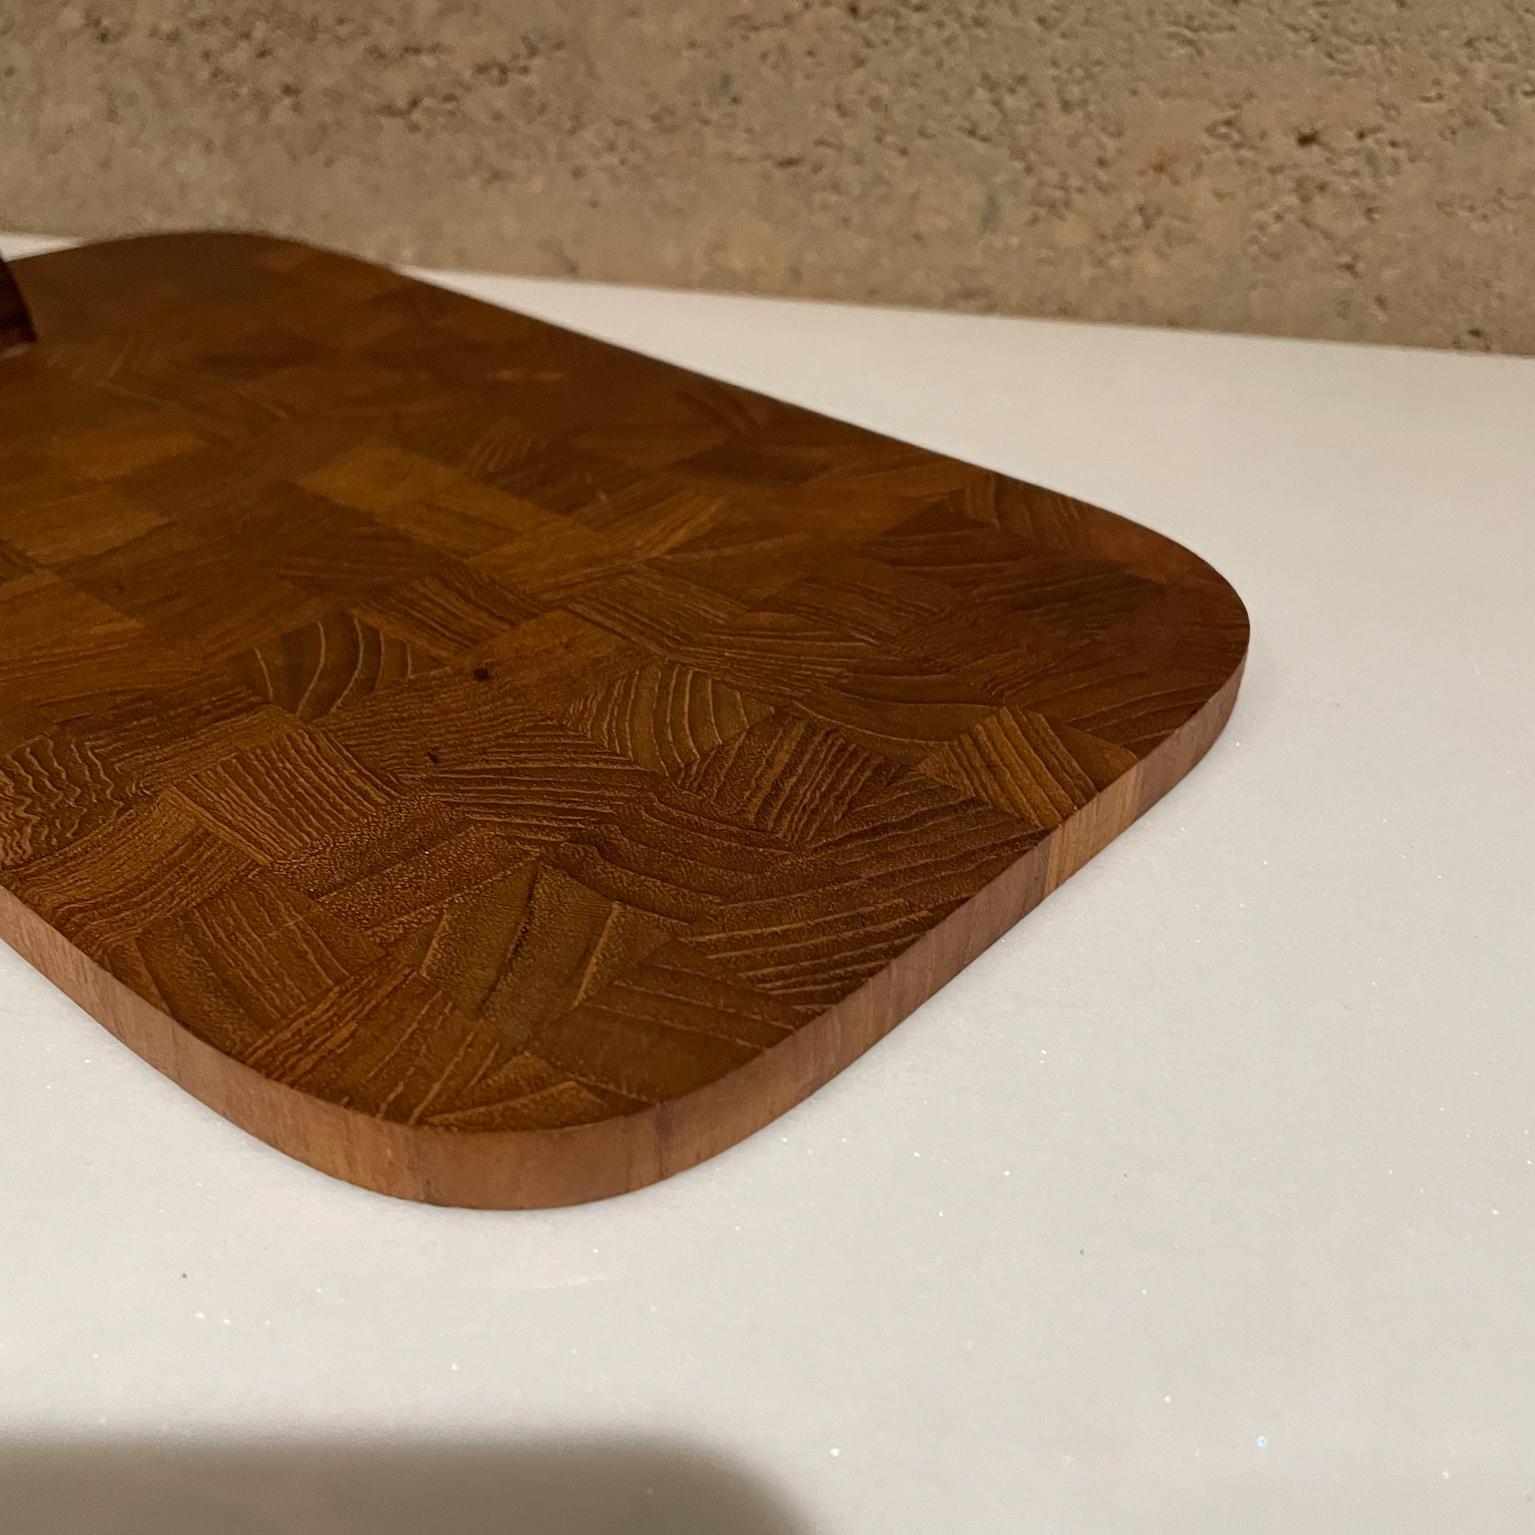 1960s Teakwood Hostess Serving Tray Cheese Charcuterie Board Denmark For Sale 1